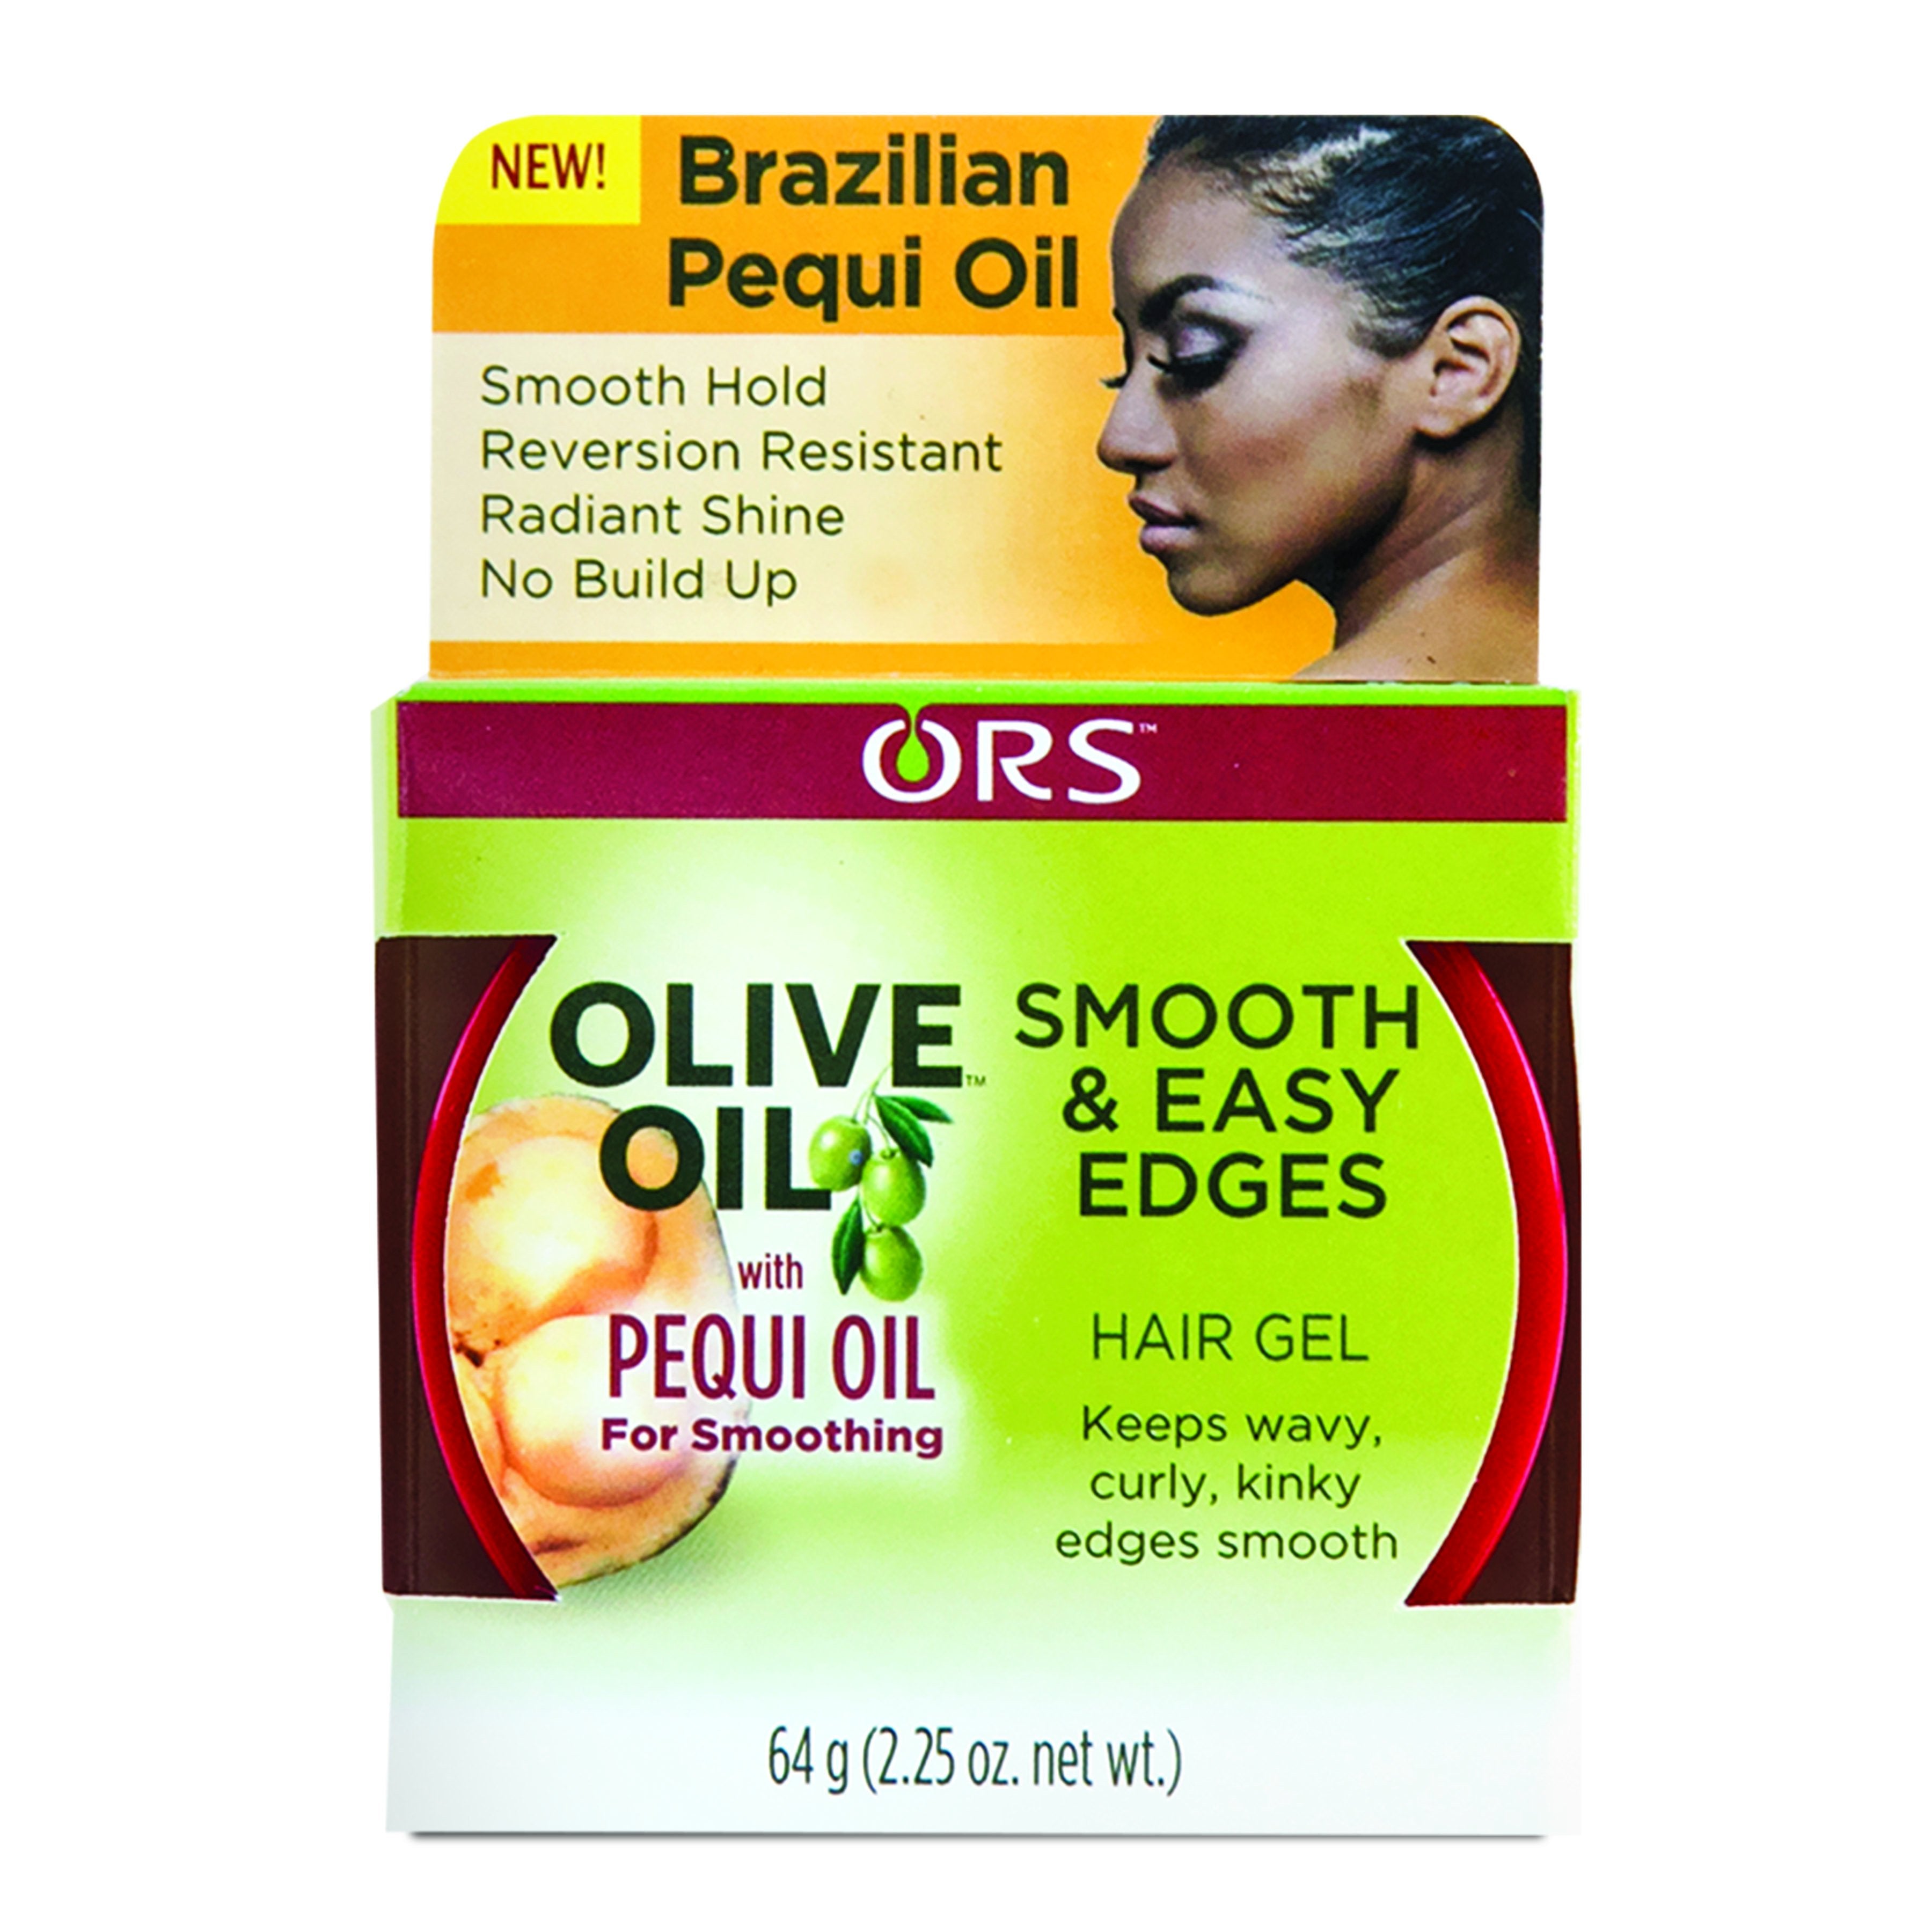 4th Ave Market: ORS Olive Oil Smooth & Easy Edges Hair Gel with Pequi Oil 2.25 oz